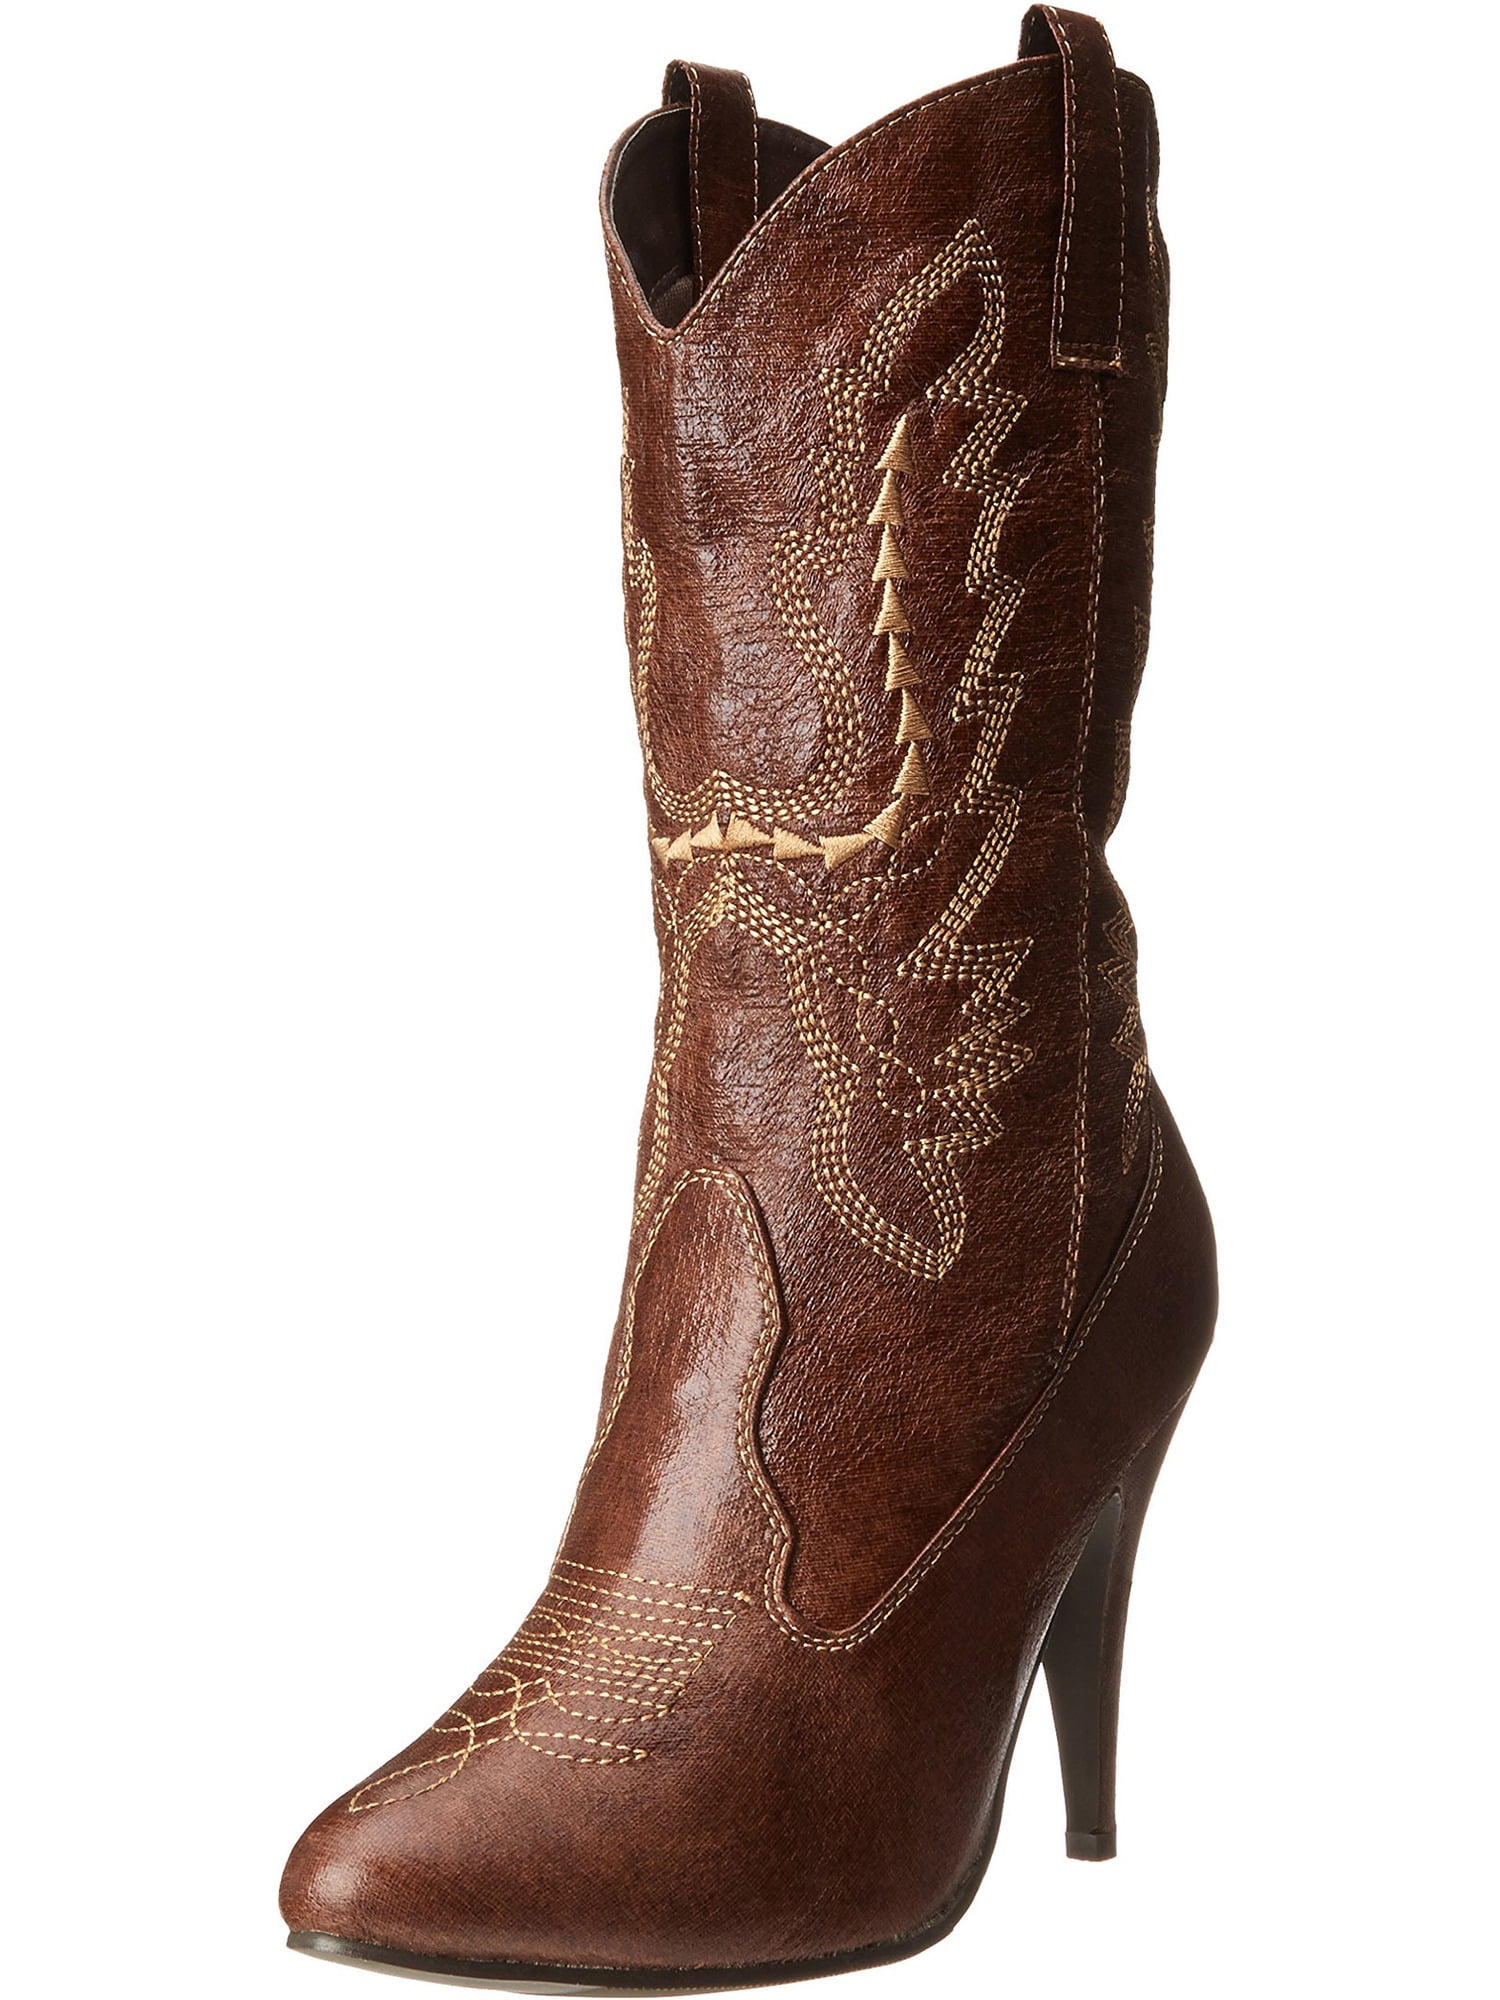 4 Inch Sexy Cowgirl Boots High Heel Mid 